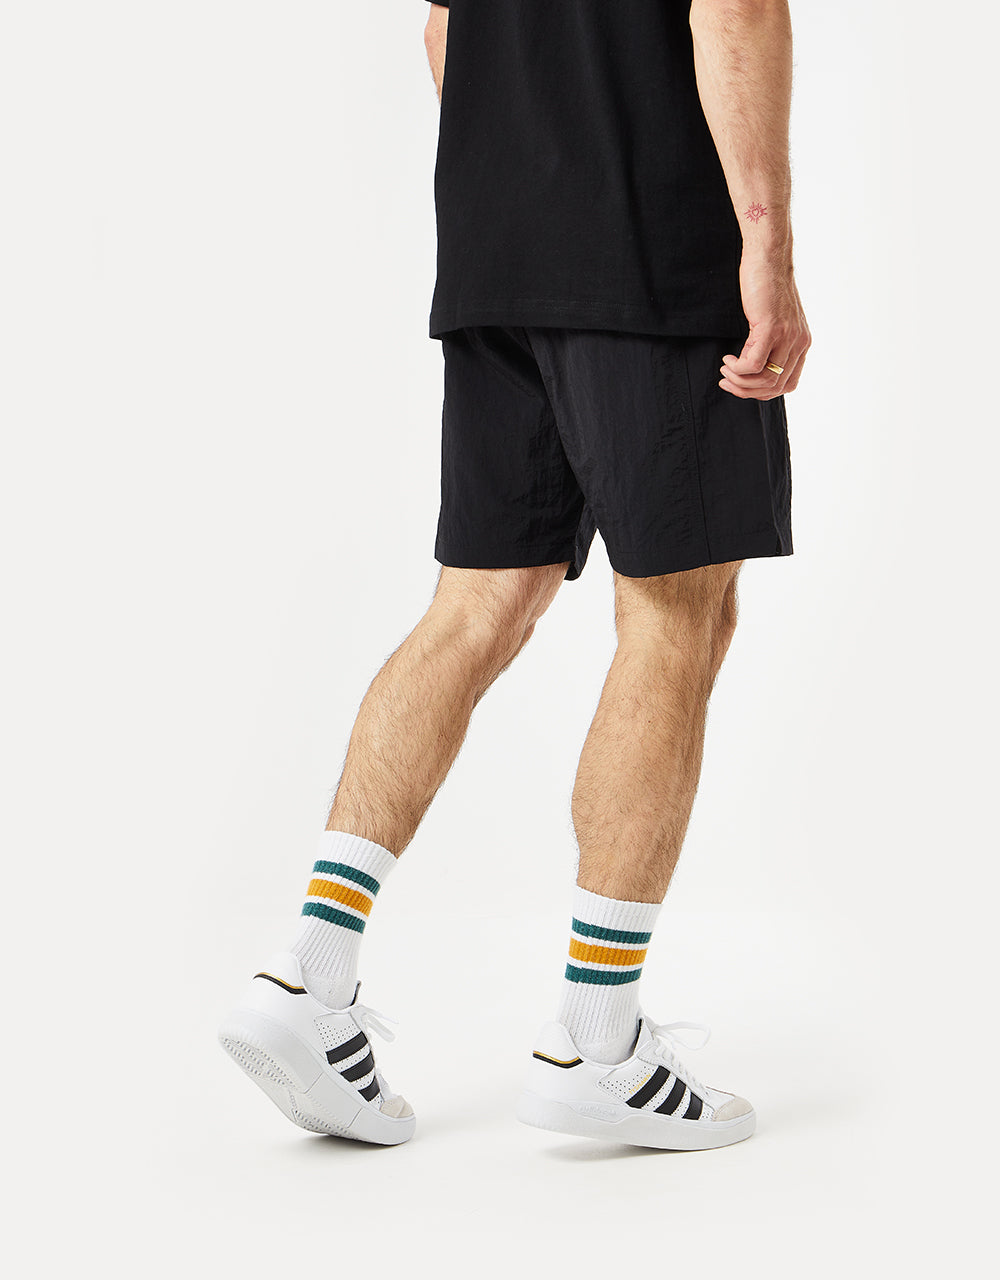 Route One Jammin Shorts - Black